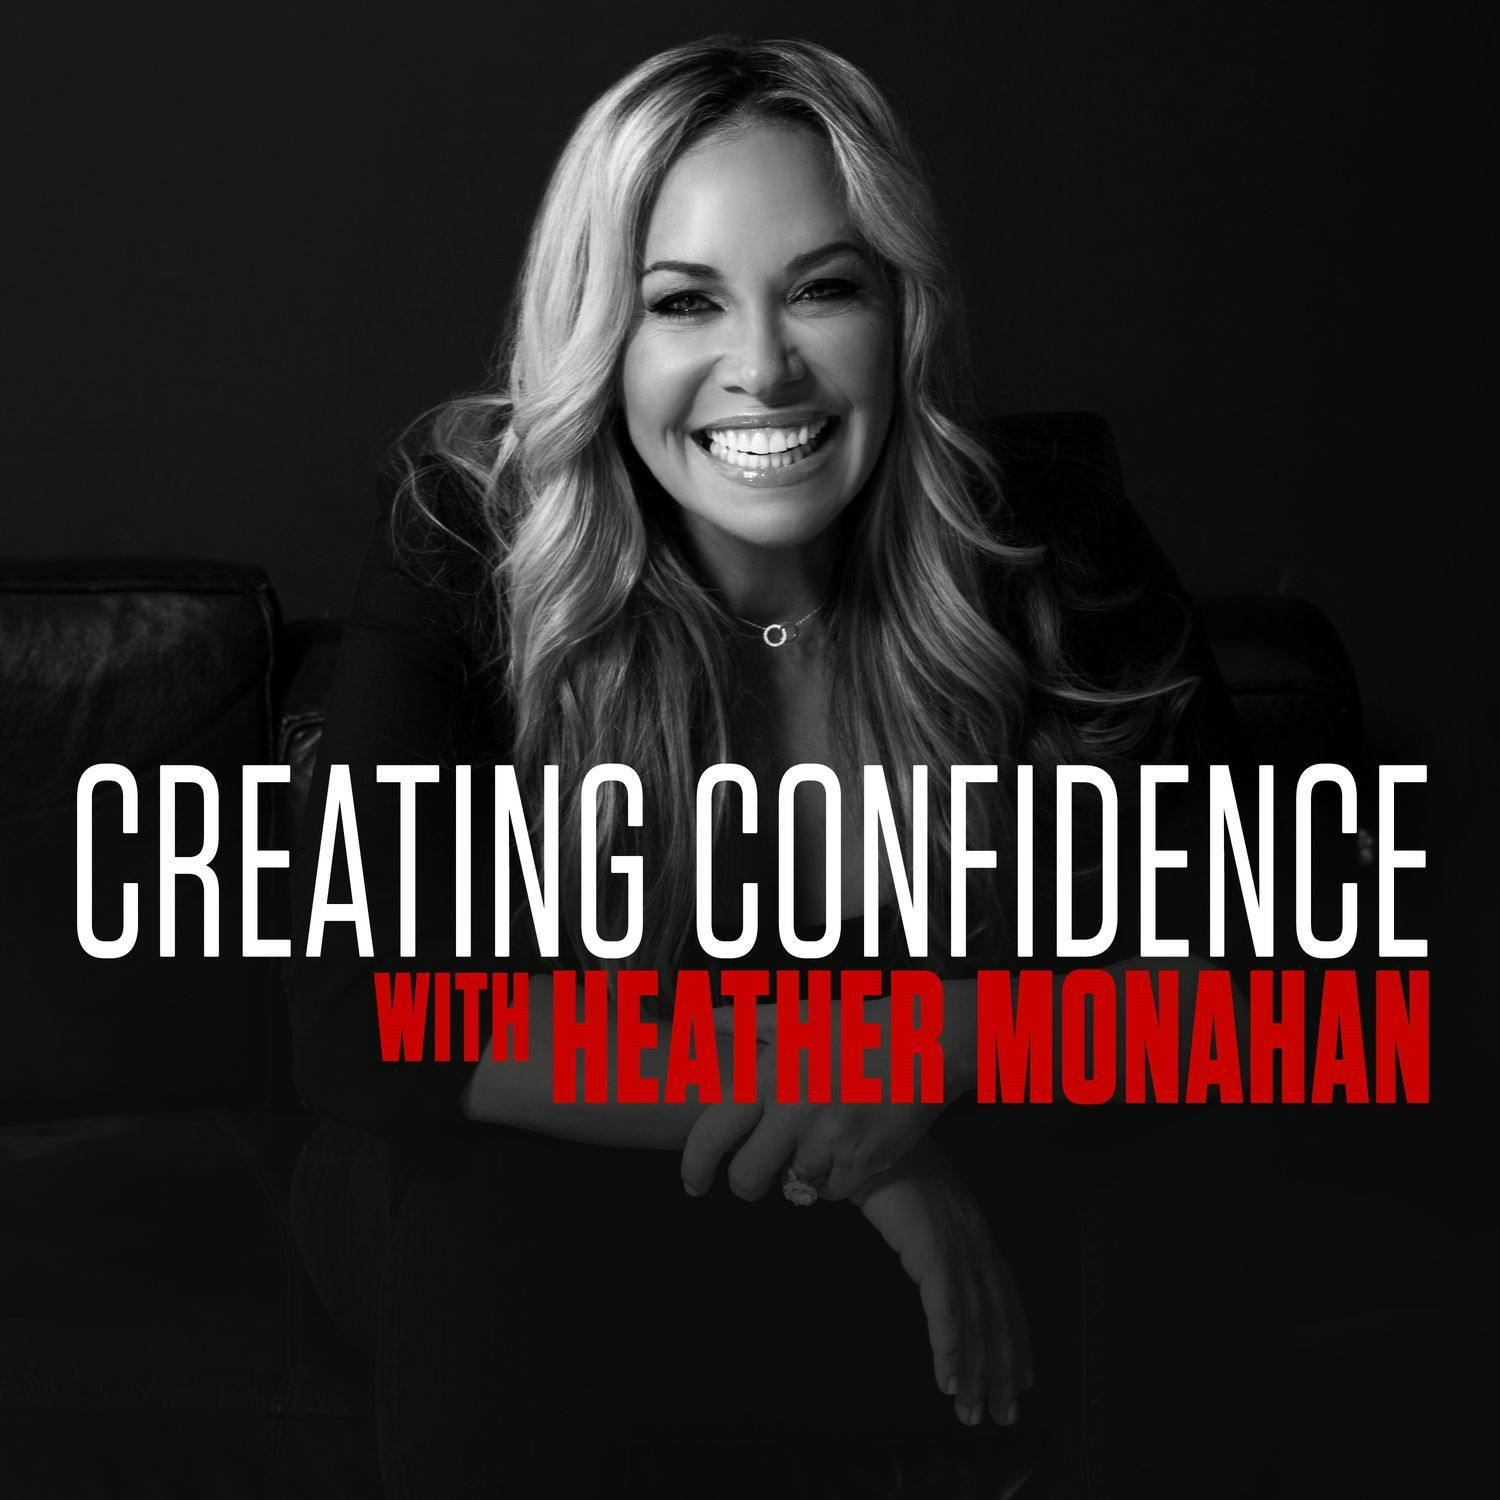 #179: The Secret To Getting ANYTHING You Want In Life With Jennifer Cohen, CEO of Suprema Fitness  by Heather Monahan | YAP Media Network